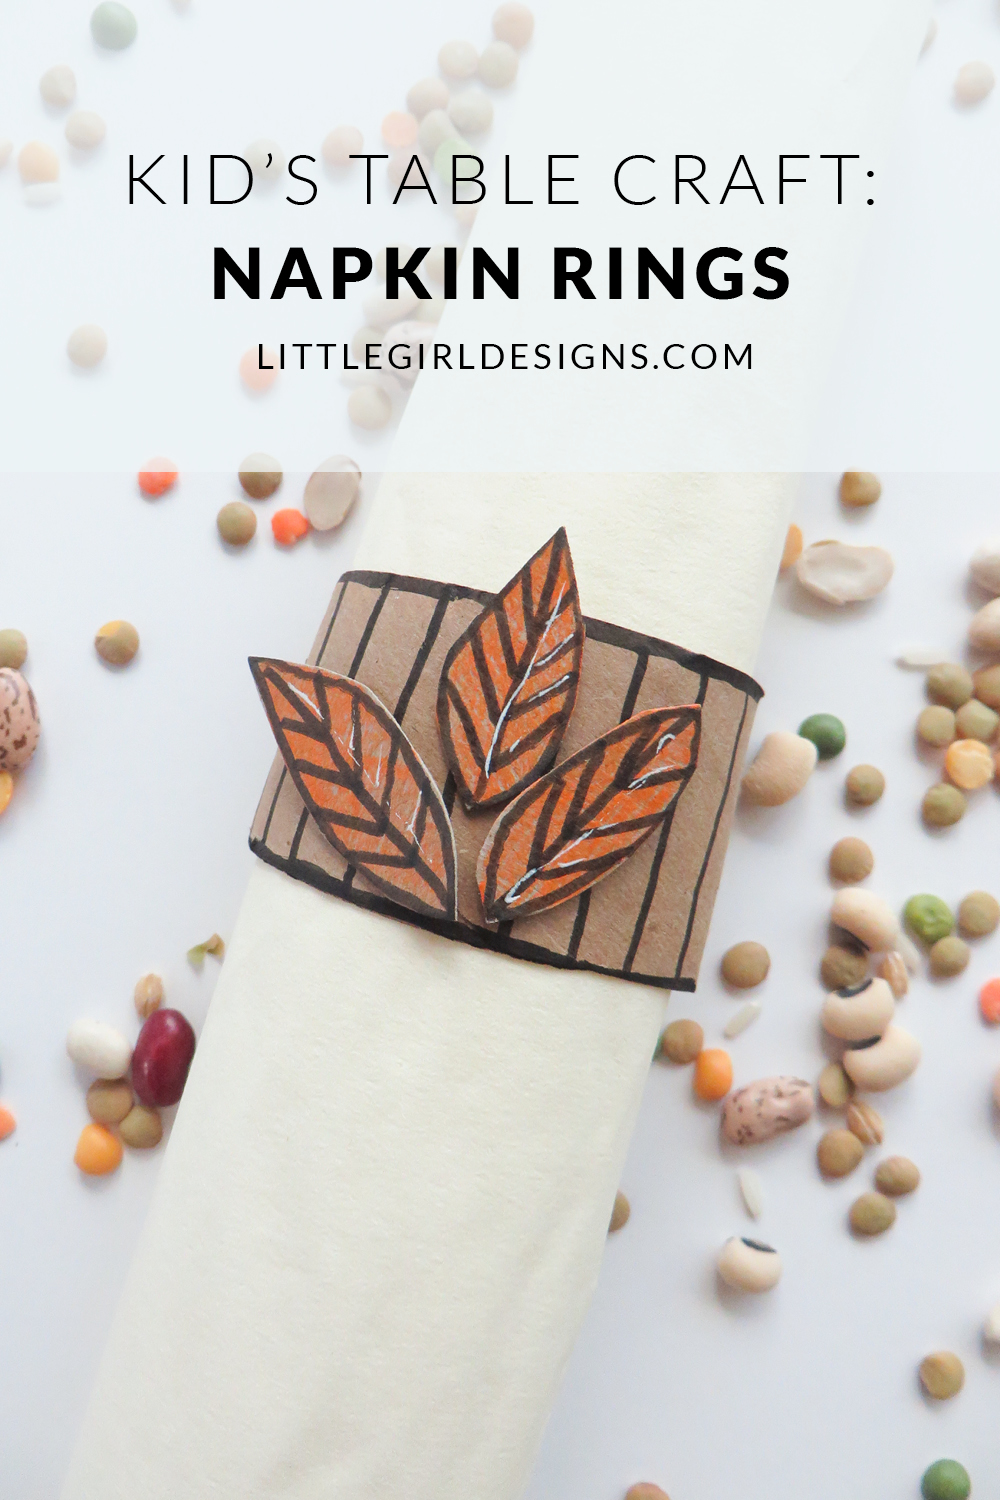 Kid's Table Craft: Napkin Rings! - Ah, the kid's table. Give them something fun to do with these super simple fall-themed napkin rings. You're going to love these! @ littlegirldesigns.com